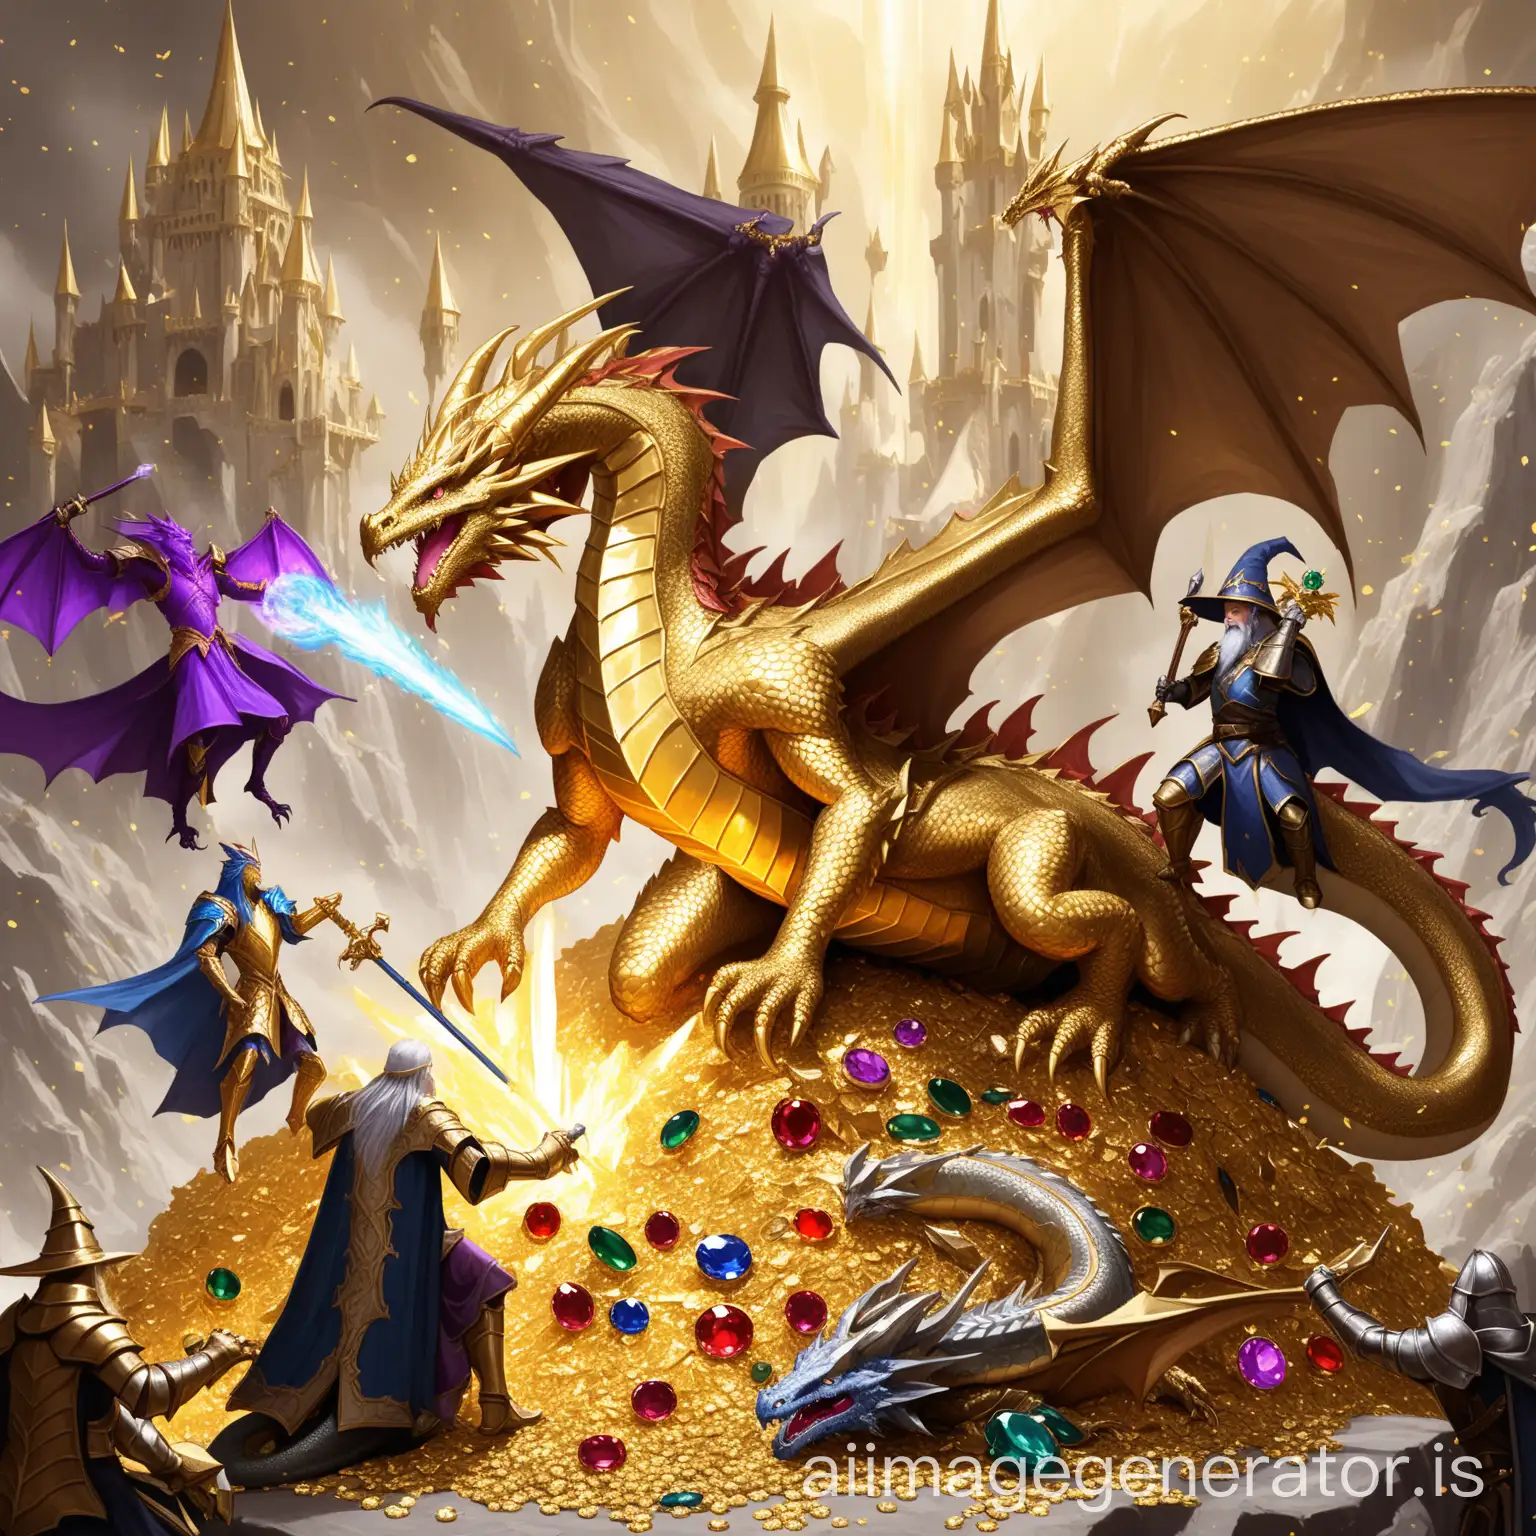 Epic-Battle-Dragon-Guarding-Hoard-vs-Wizard-and-Paladin